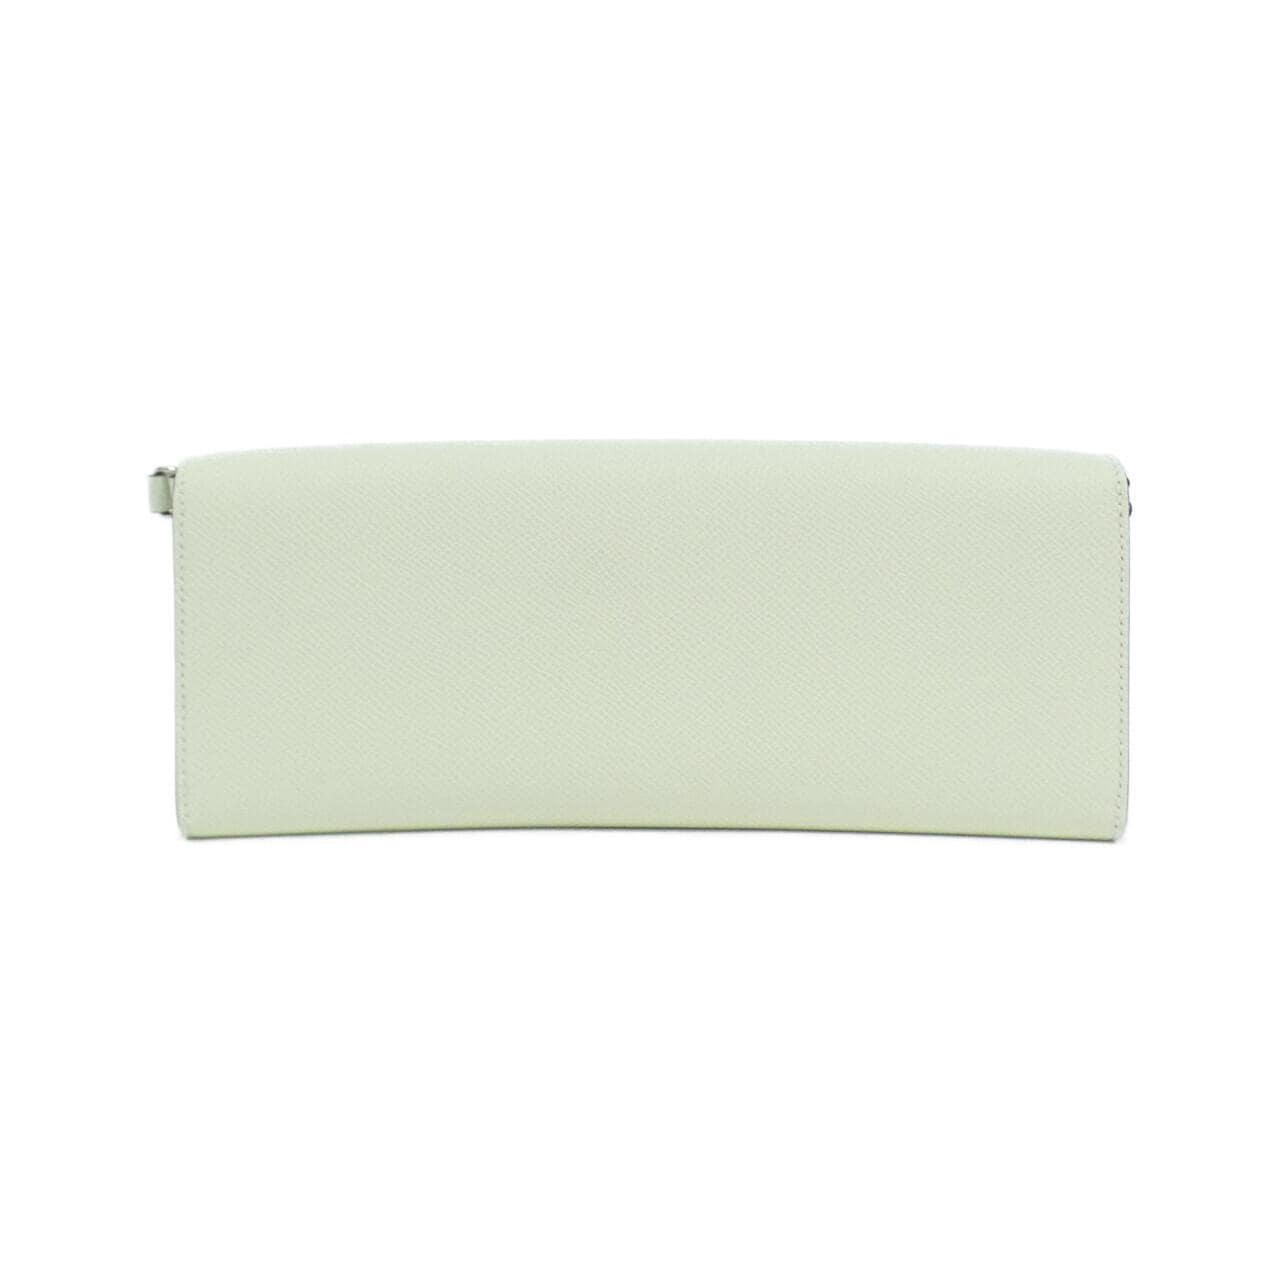 [Unused items] HERMES Chaine Dunkle To Go 084021CK Shoulder Wallet